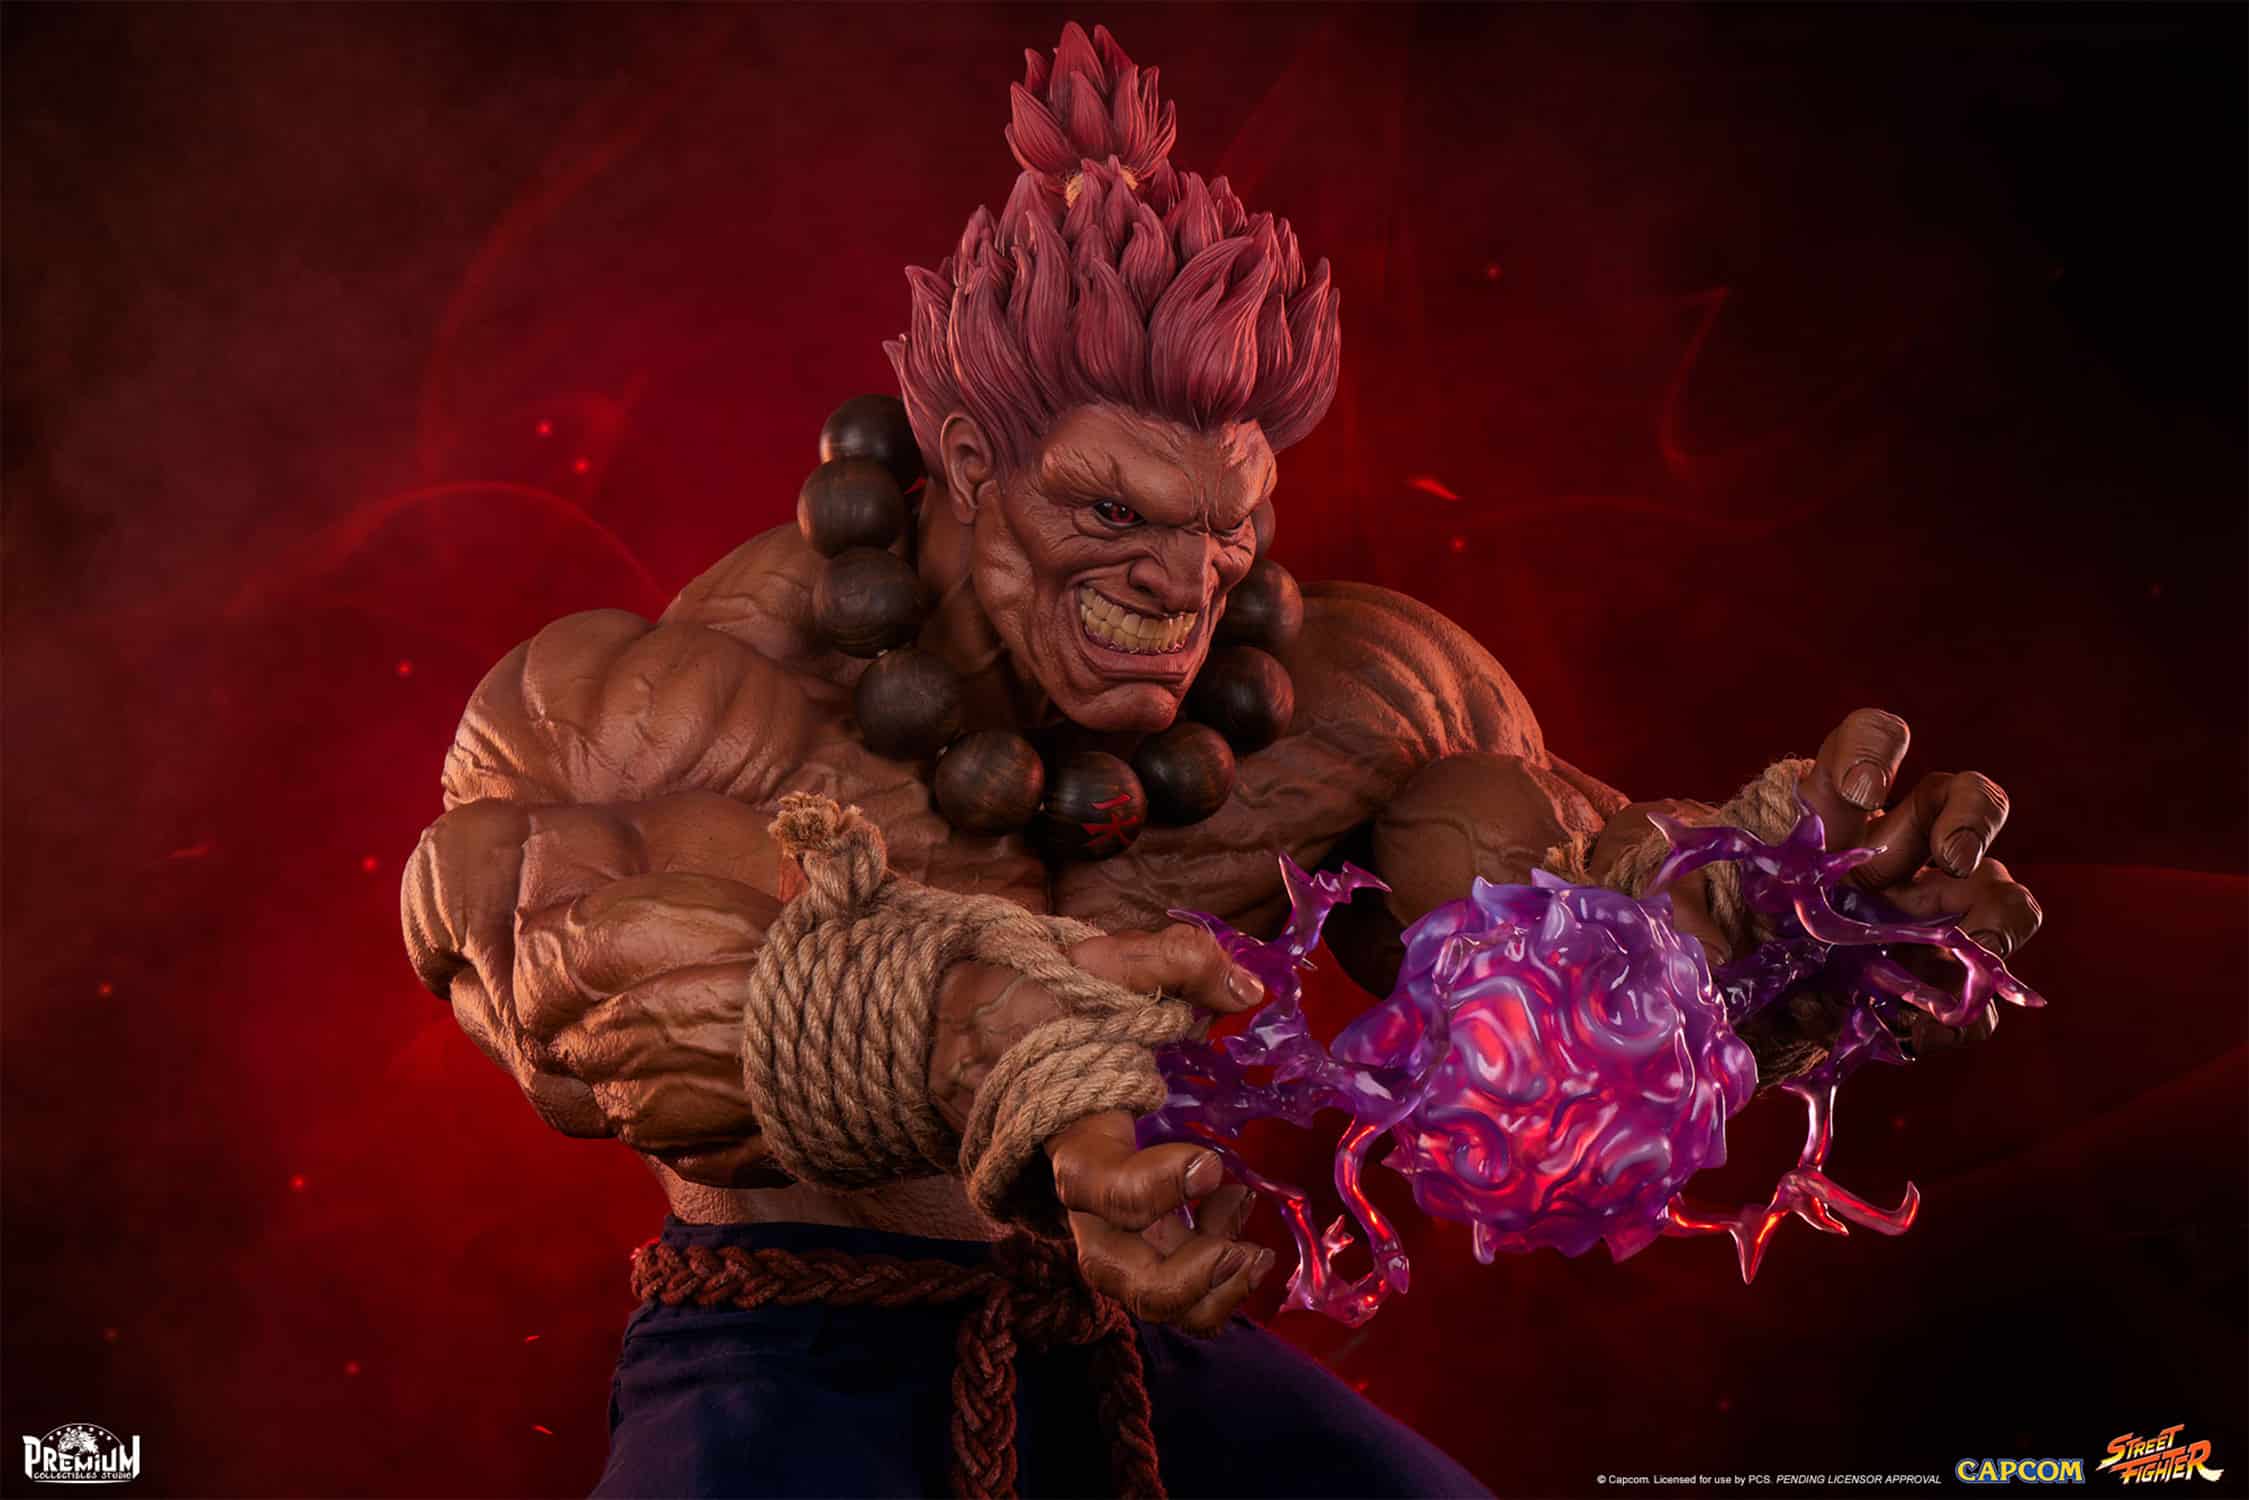 1/6 Scale Licensed Movable Akuma - Street Fighter Resin Statue